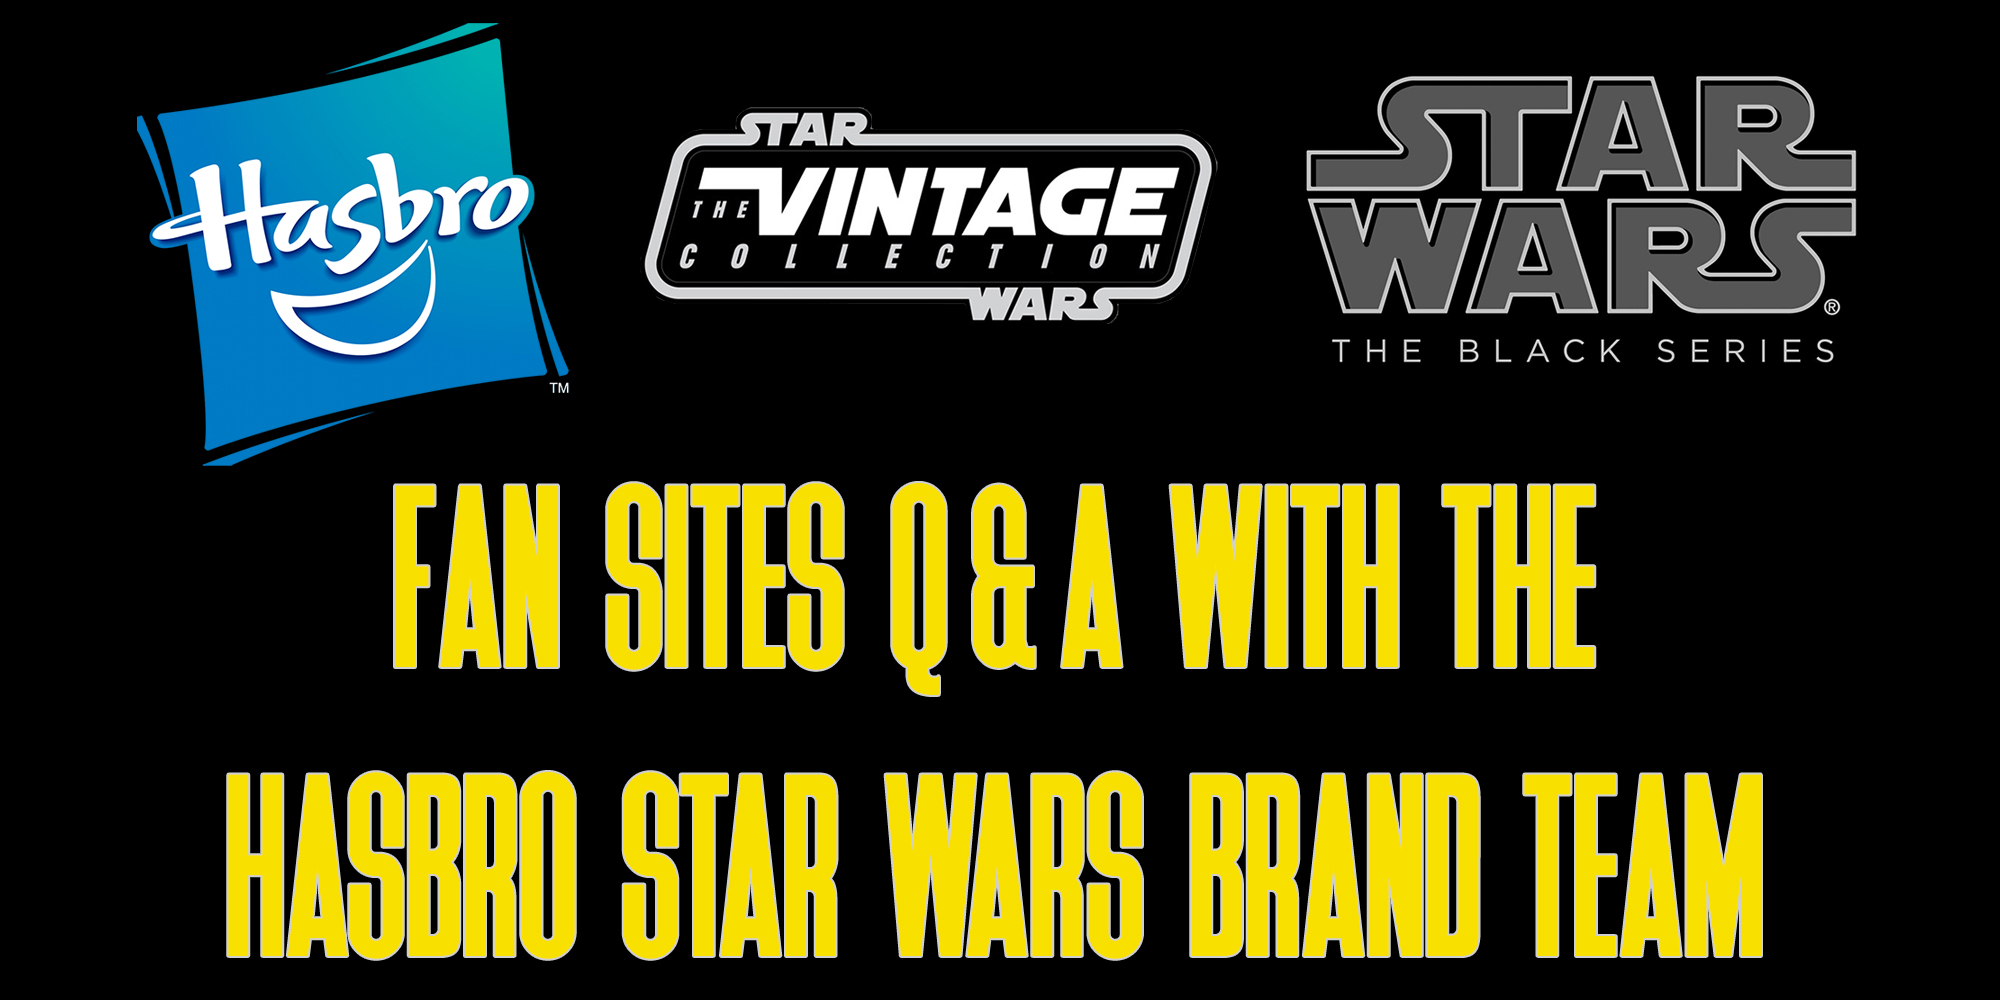 Hasbro Brand Team Q&A With Fan Sites